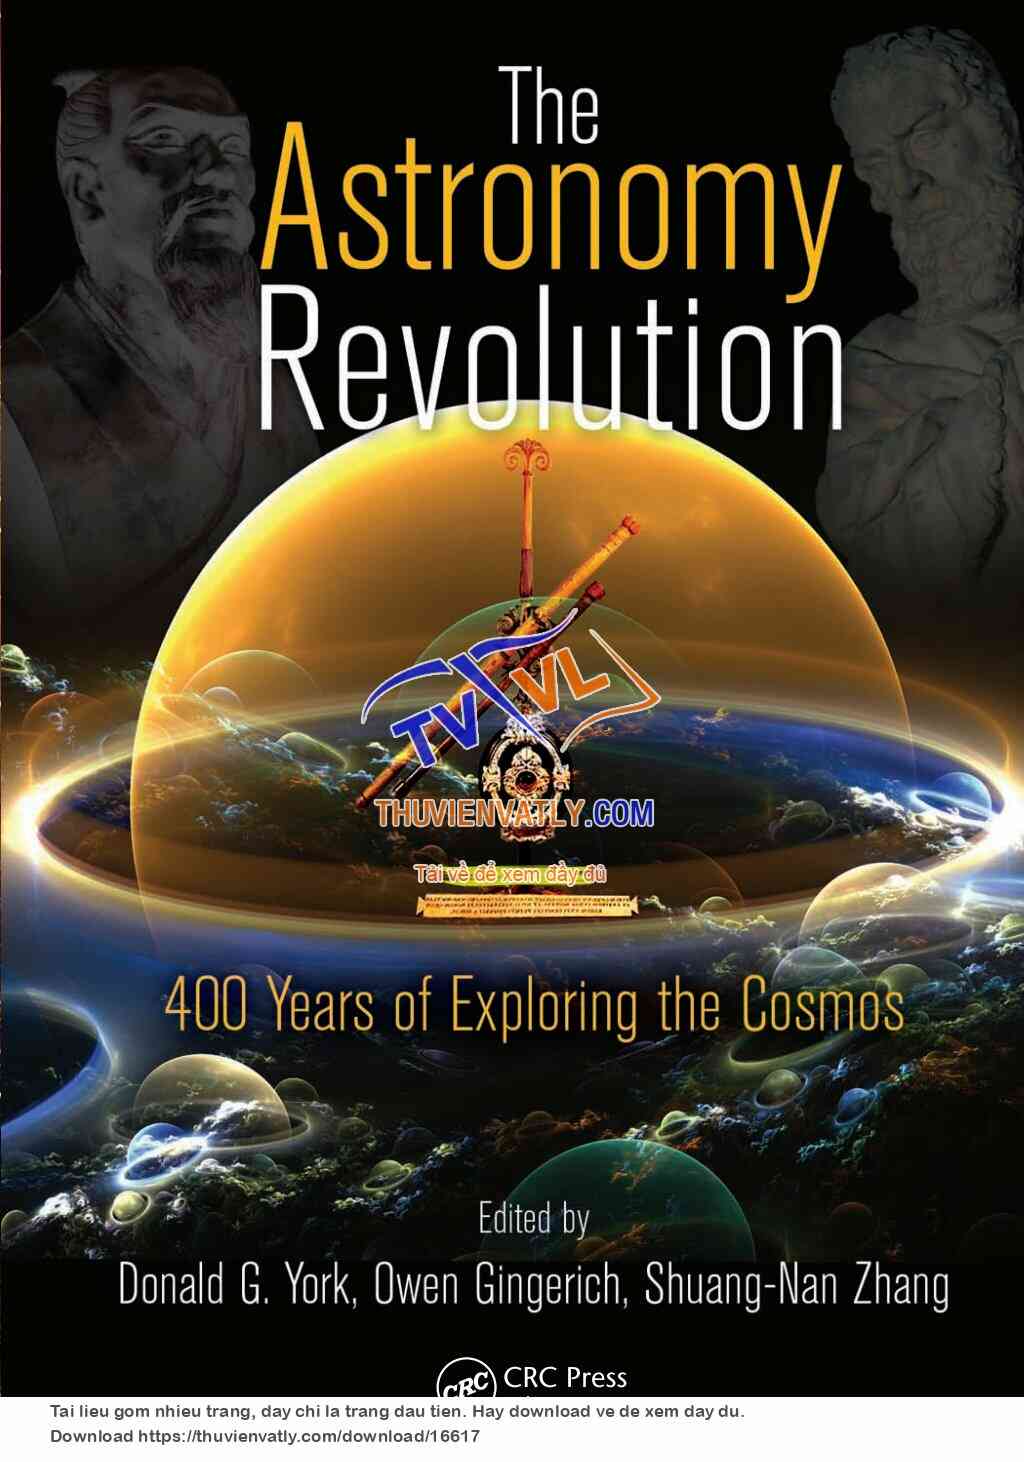 The Astronomy Revolution - 400 Years of Exploring the Cosmos (Donald G. York et al, CRC Press 2012)